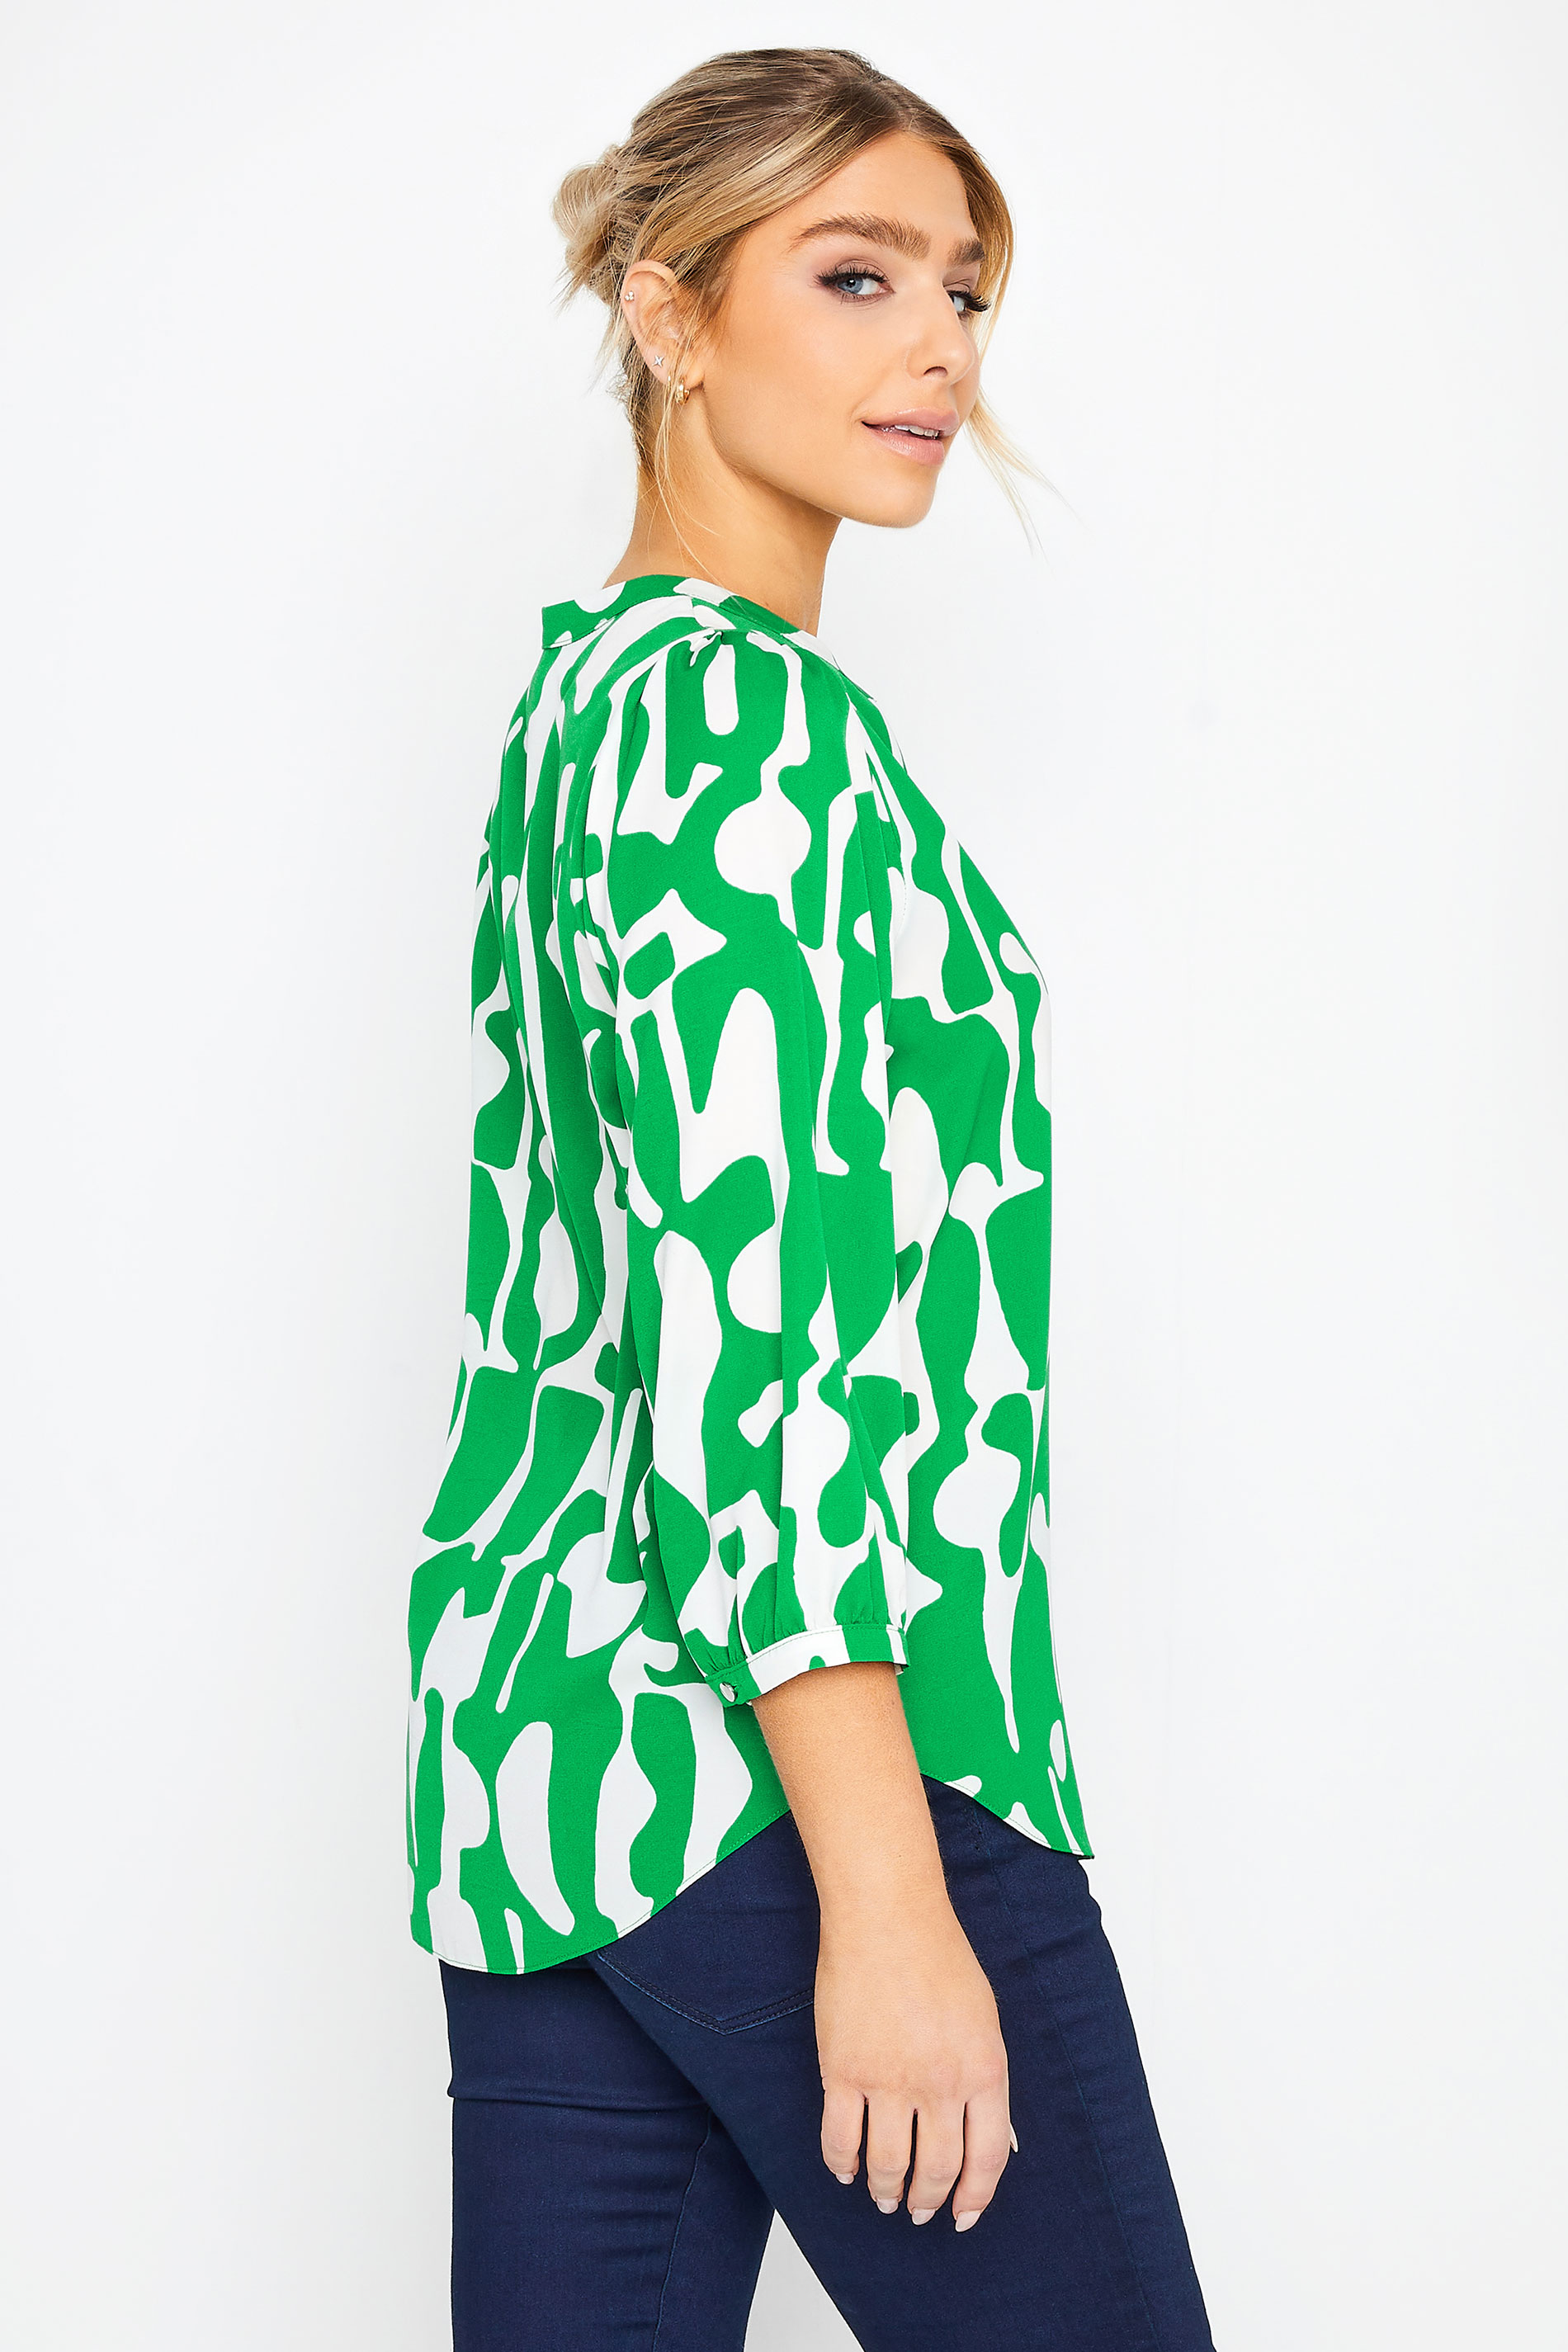 M&Co Green & White Abstract Print 3/4 Sleeve Blouse | M&Co